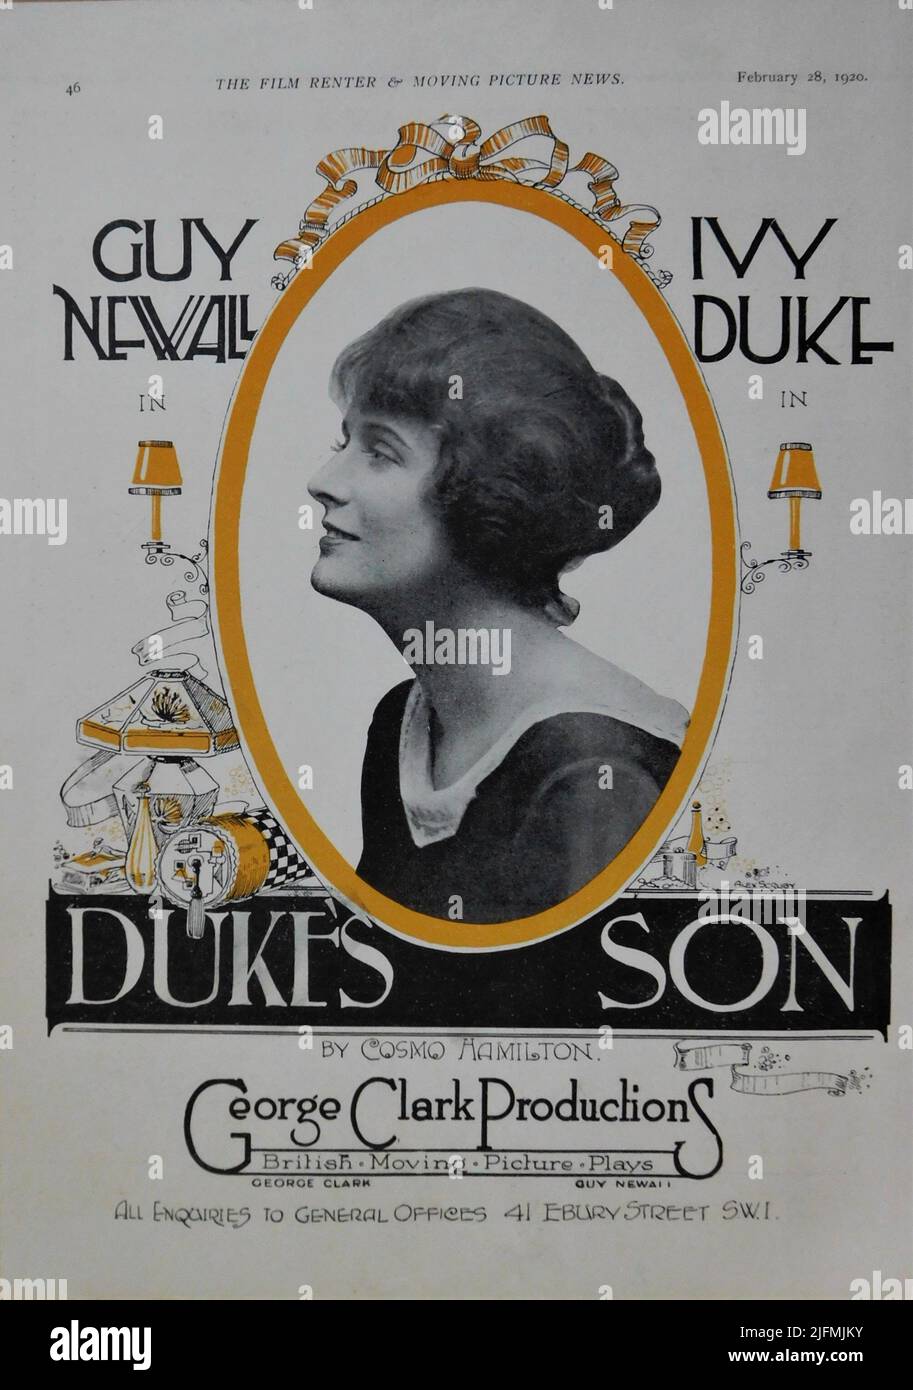 GUY NEWALL und IVY DUKE in DUKE'S SON aka WASANDED LIVES (in US) 1920 Regisseur FRANKLIN DYALL Roman Cosmo Hamilton Szenario Guy Newall George Clark productions / Stoll Picture Productions Stockfoto